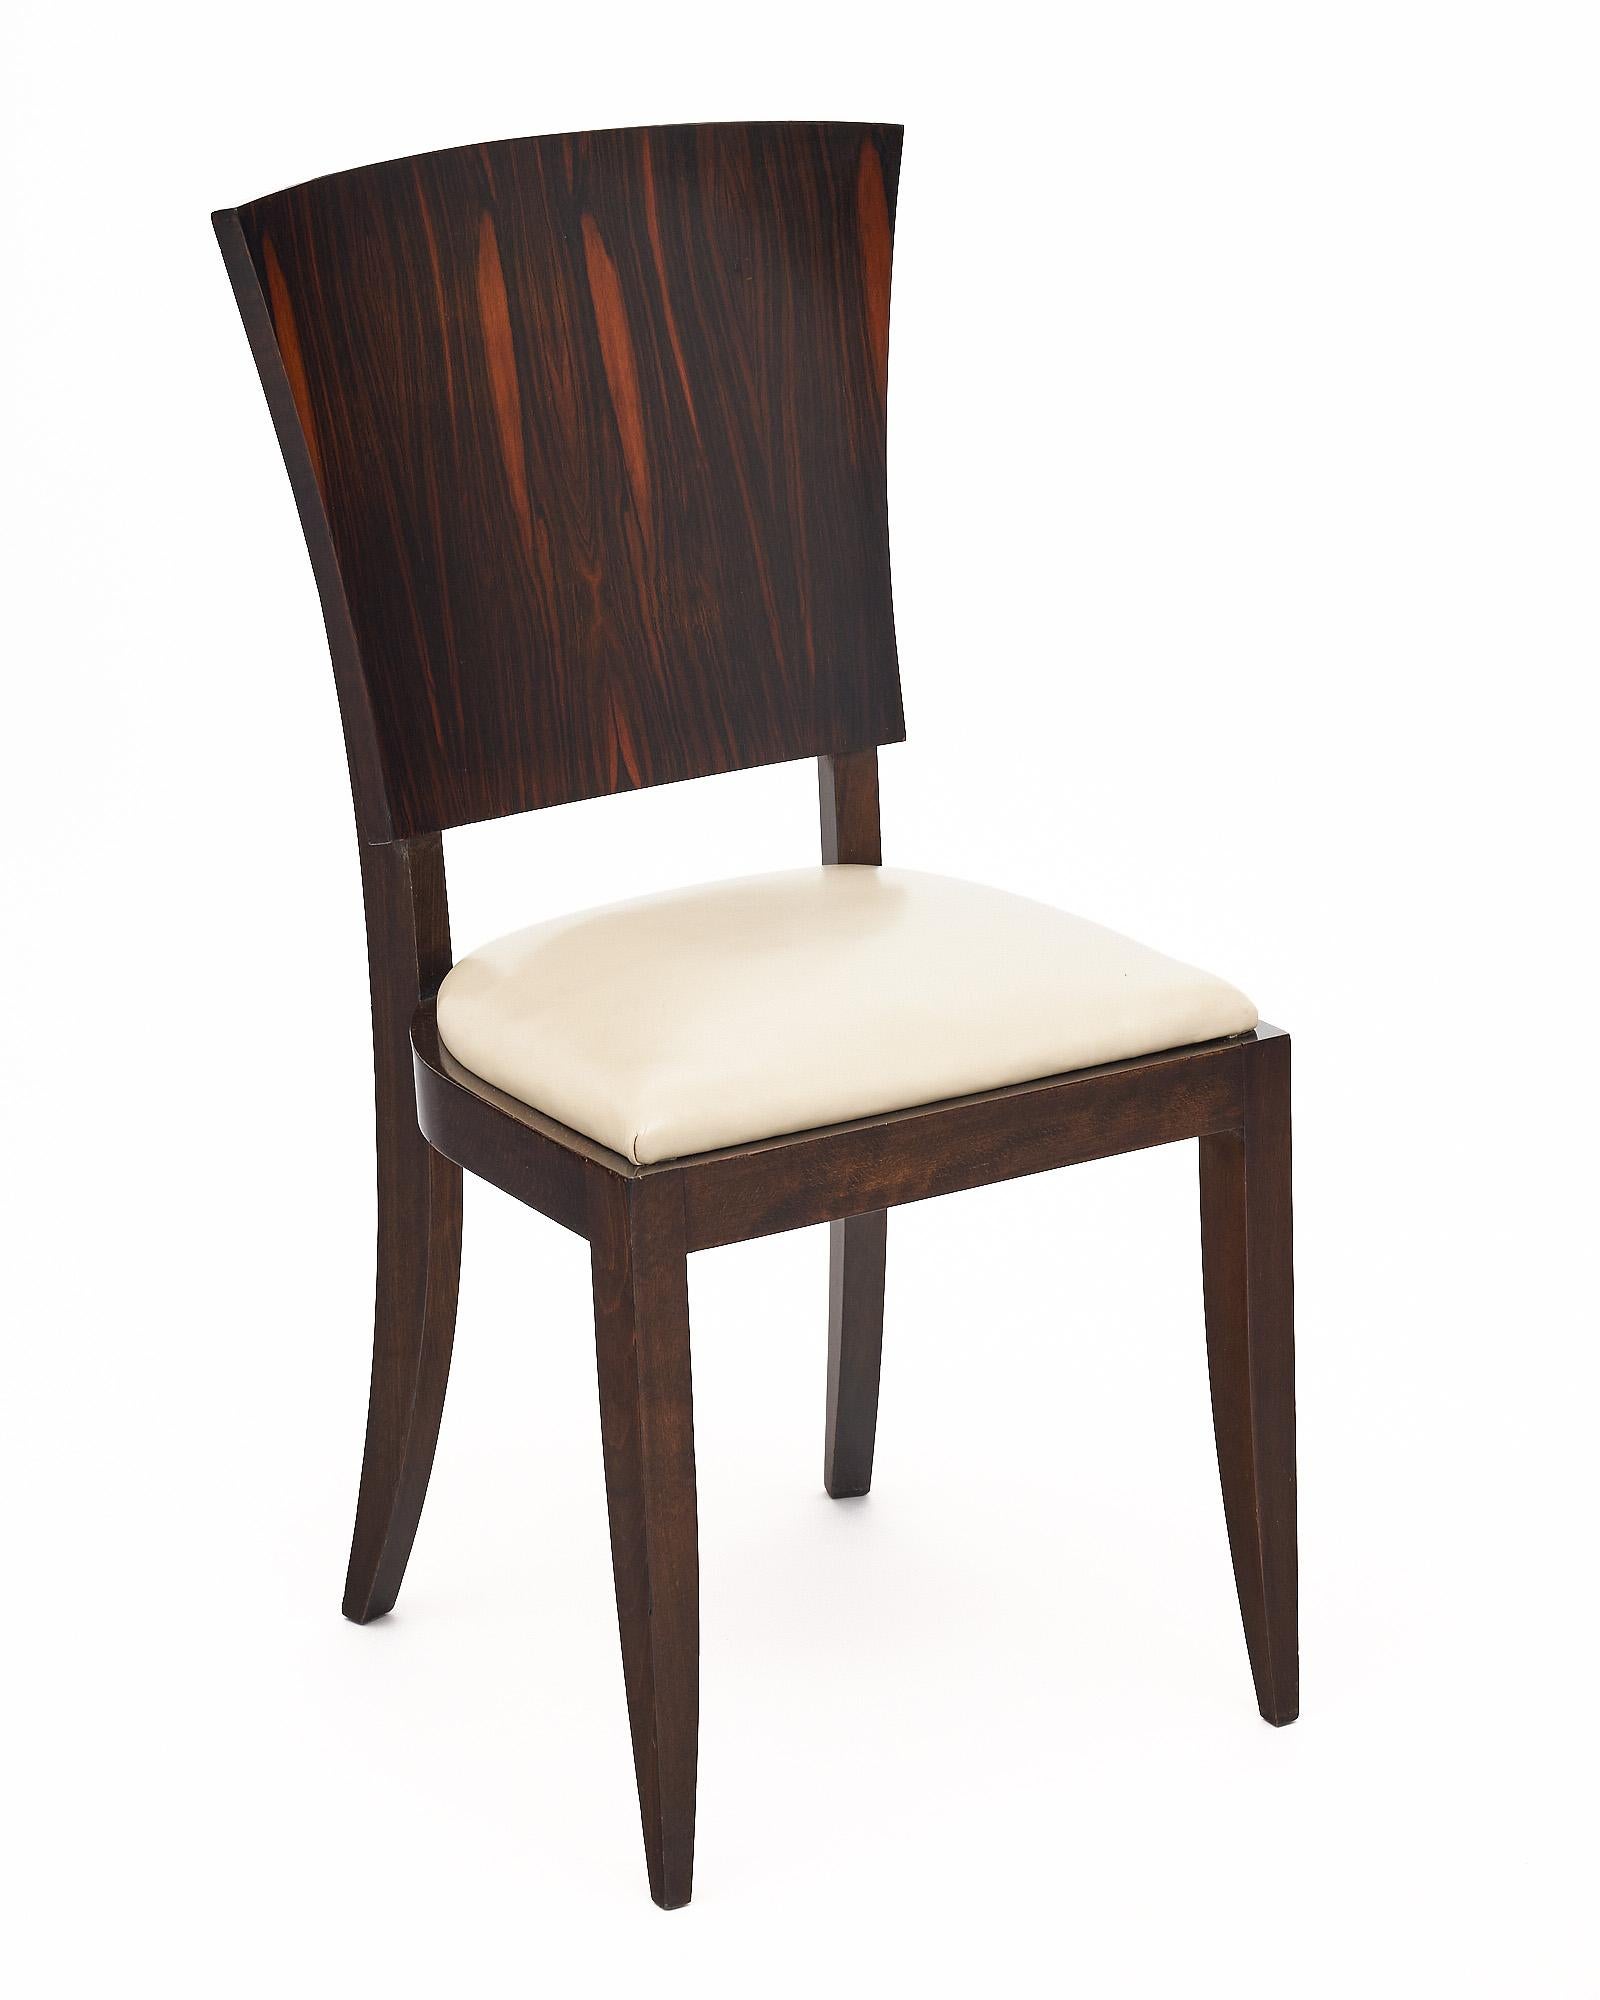 Set of six dining chairs from the Art Deco period in France In the manner of Jules Leleu. The chairs are made with striking Macassar of ebony backs and white leather seats. The chairs have been finished with a lustrous French polish.
